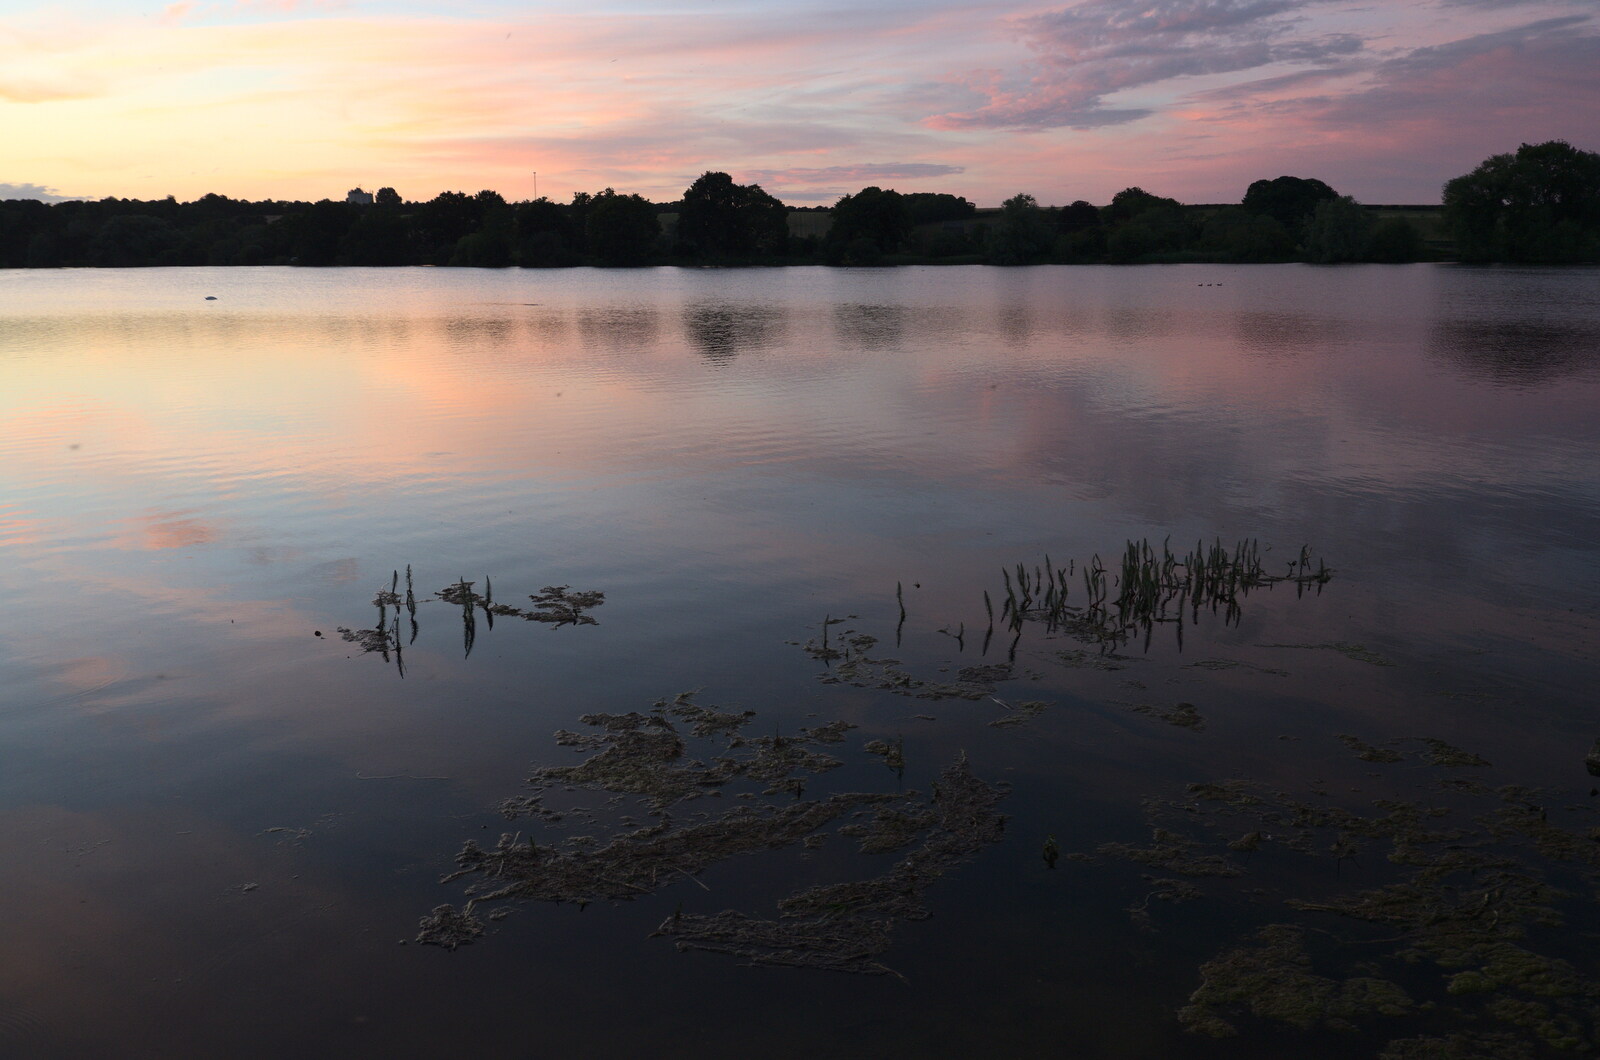 Sunset over the lake from Camping at the Lake, Weybread, Harleston - 25th June 2022